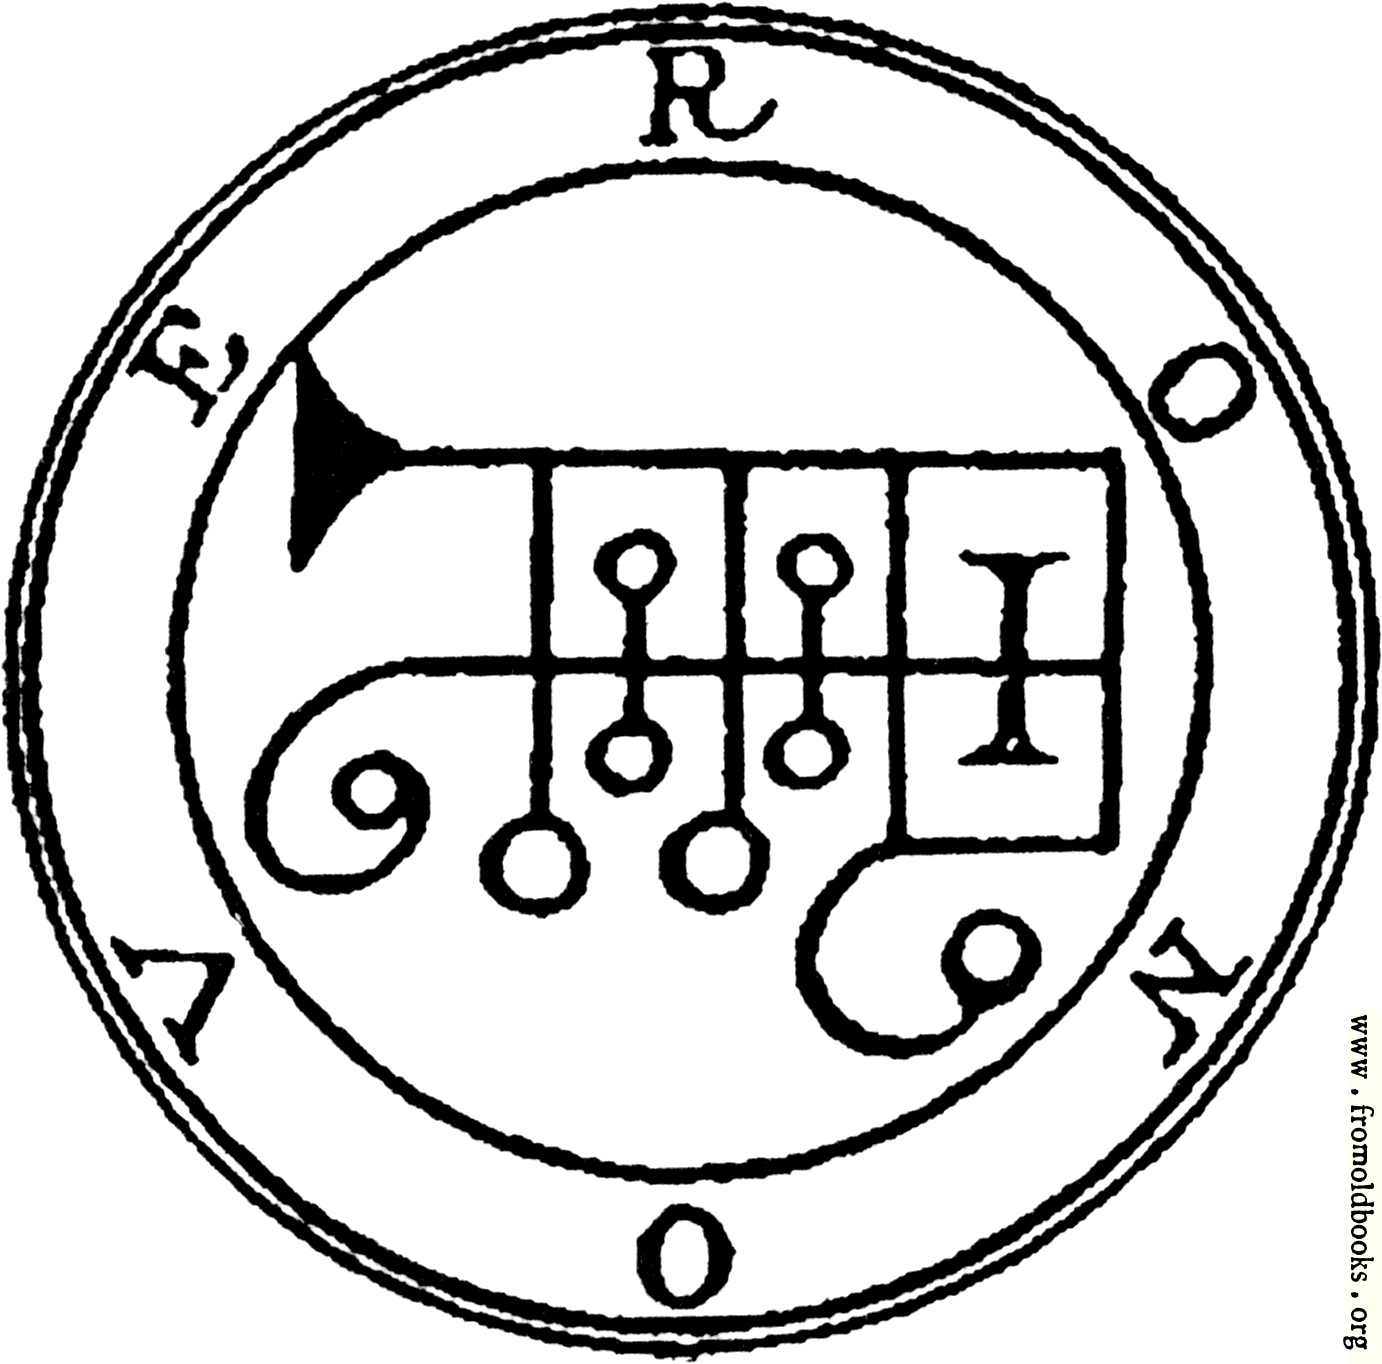 [Picture: 27. Seal of Renove.]